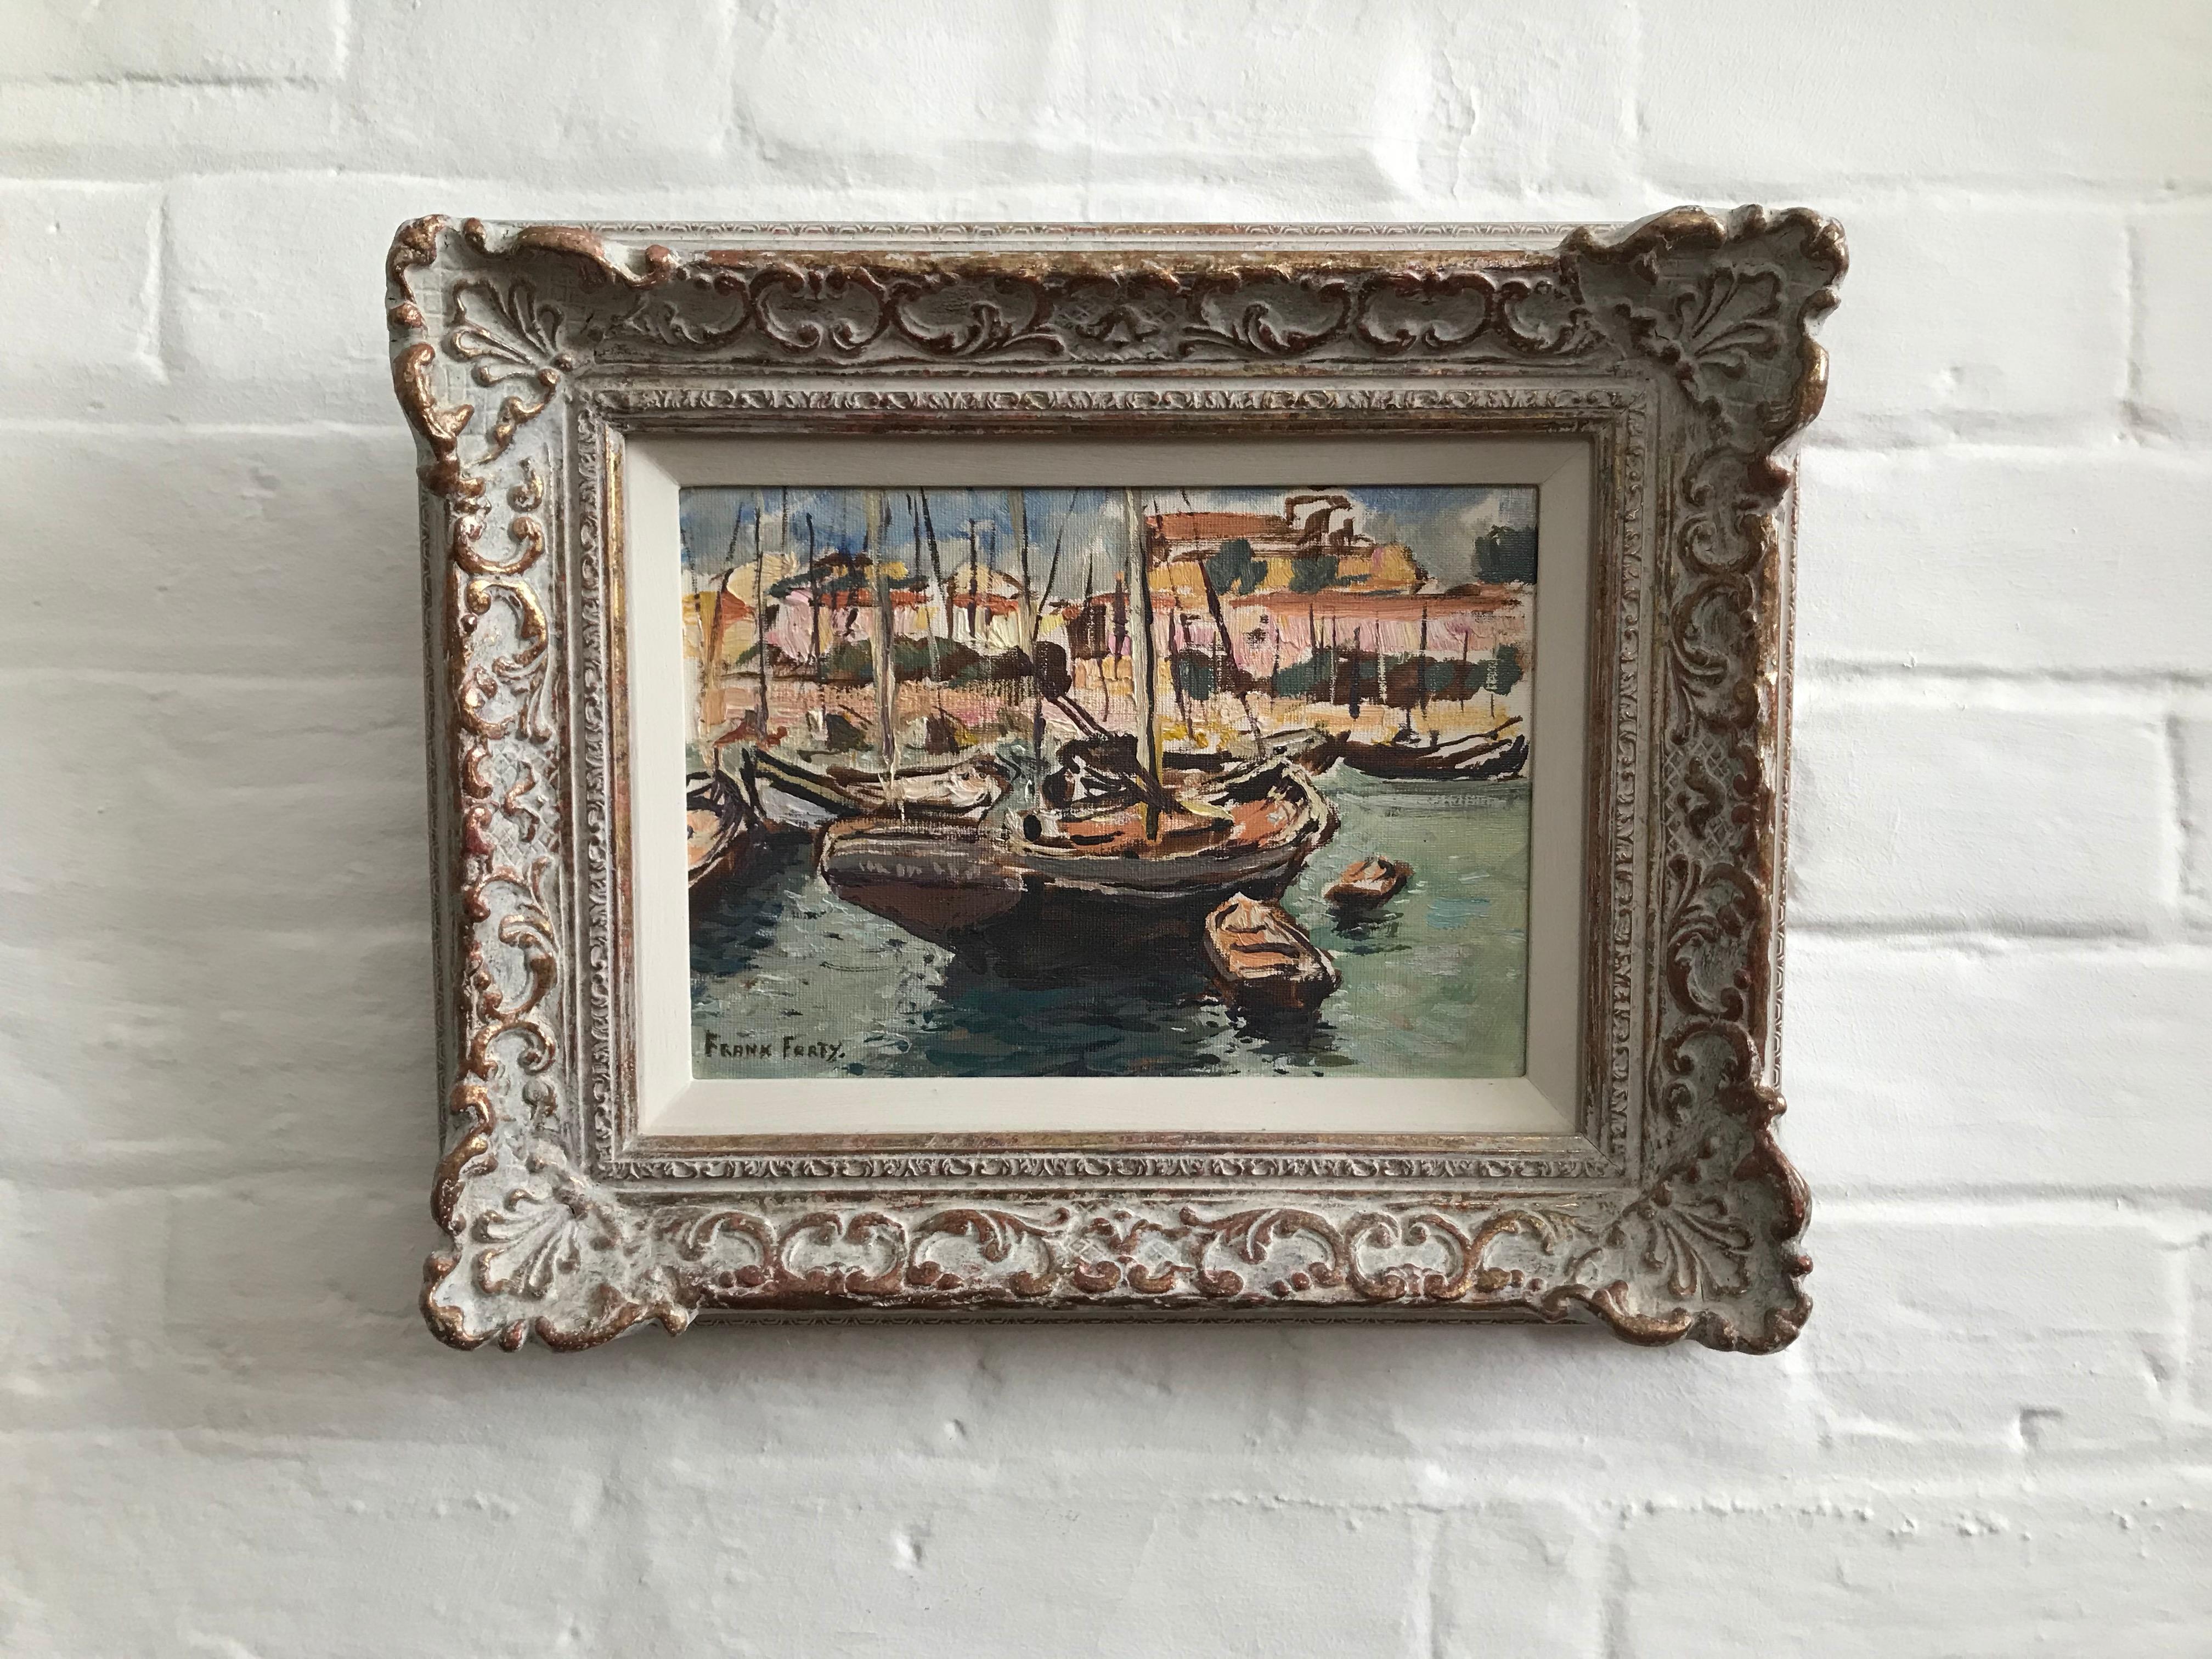 (One of two paintings we are offering by the artist, both with wonderful frames - a discount price available if you buy both)

Frank Forty (1902-1996)
Boats in harbour
Signed
Oil on paper
6.5 x 9.5 inches
With a fabulous Impressionist style frame

A